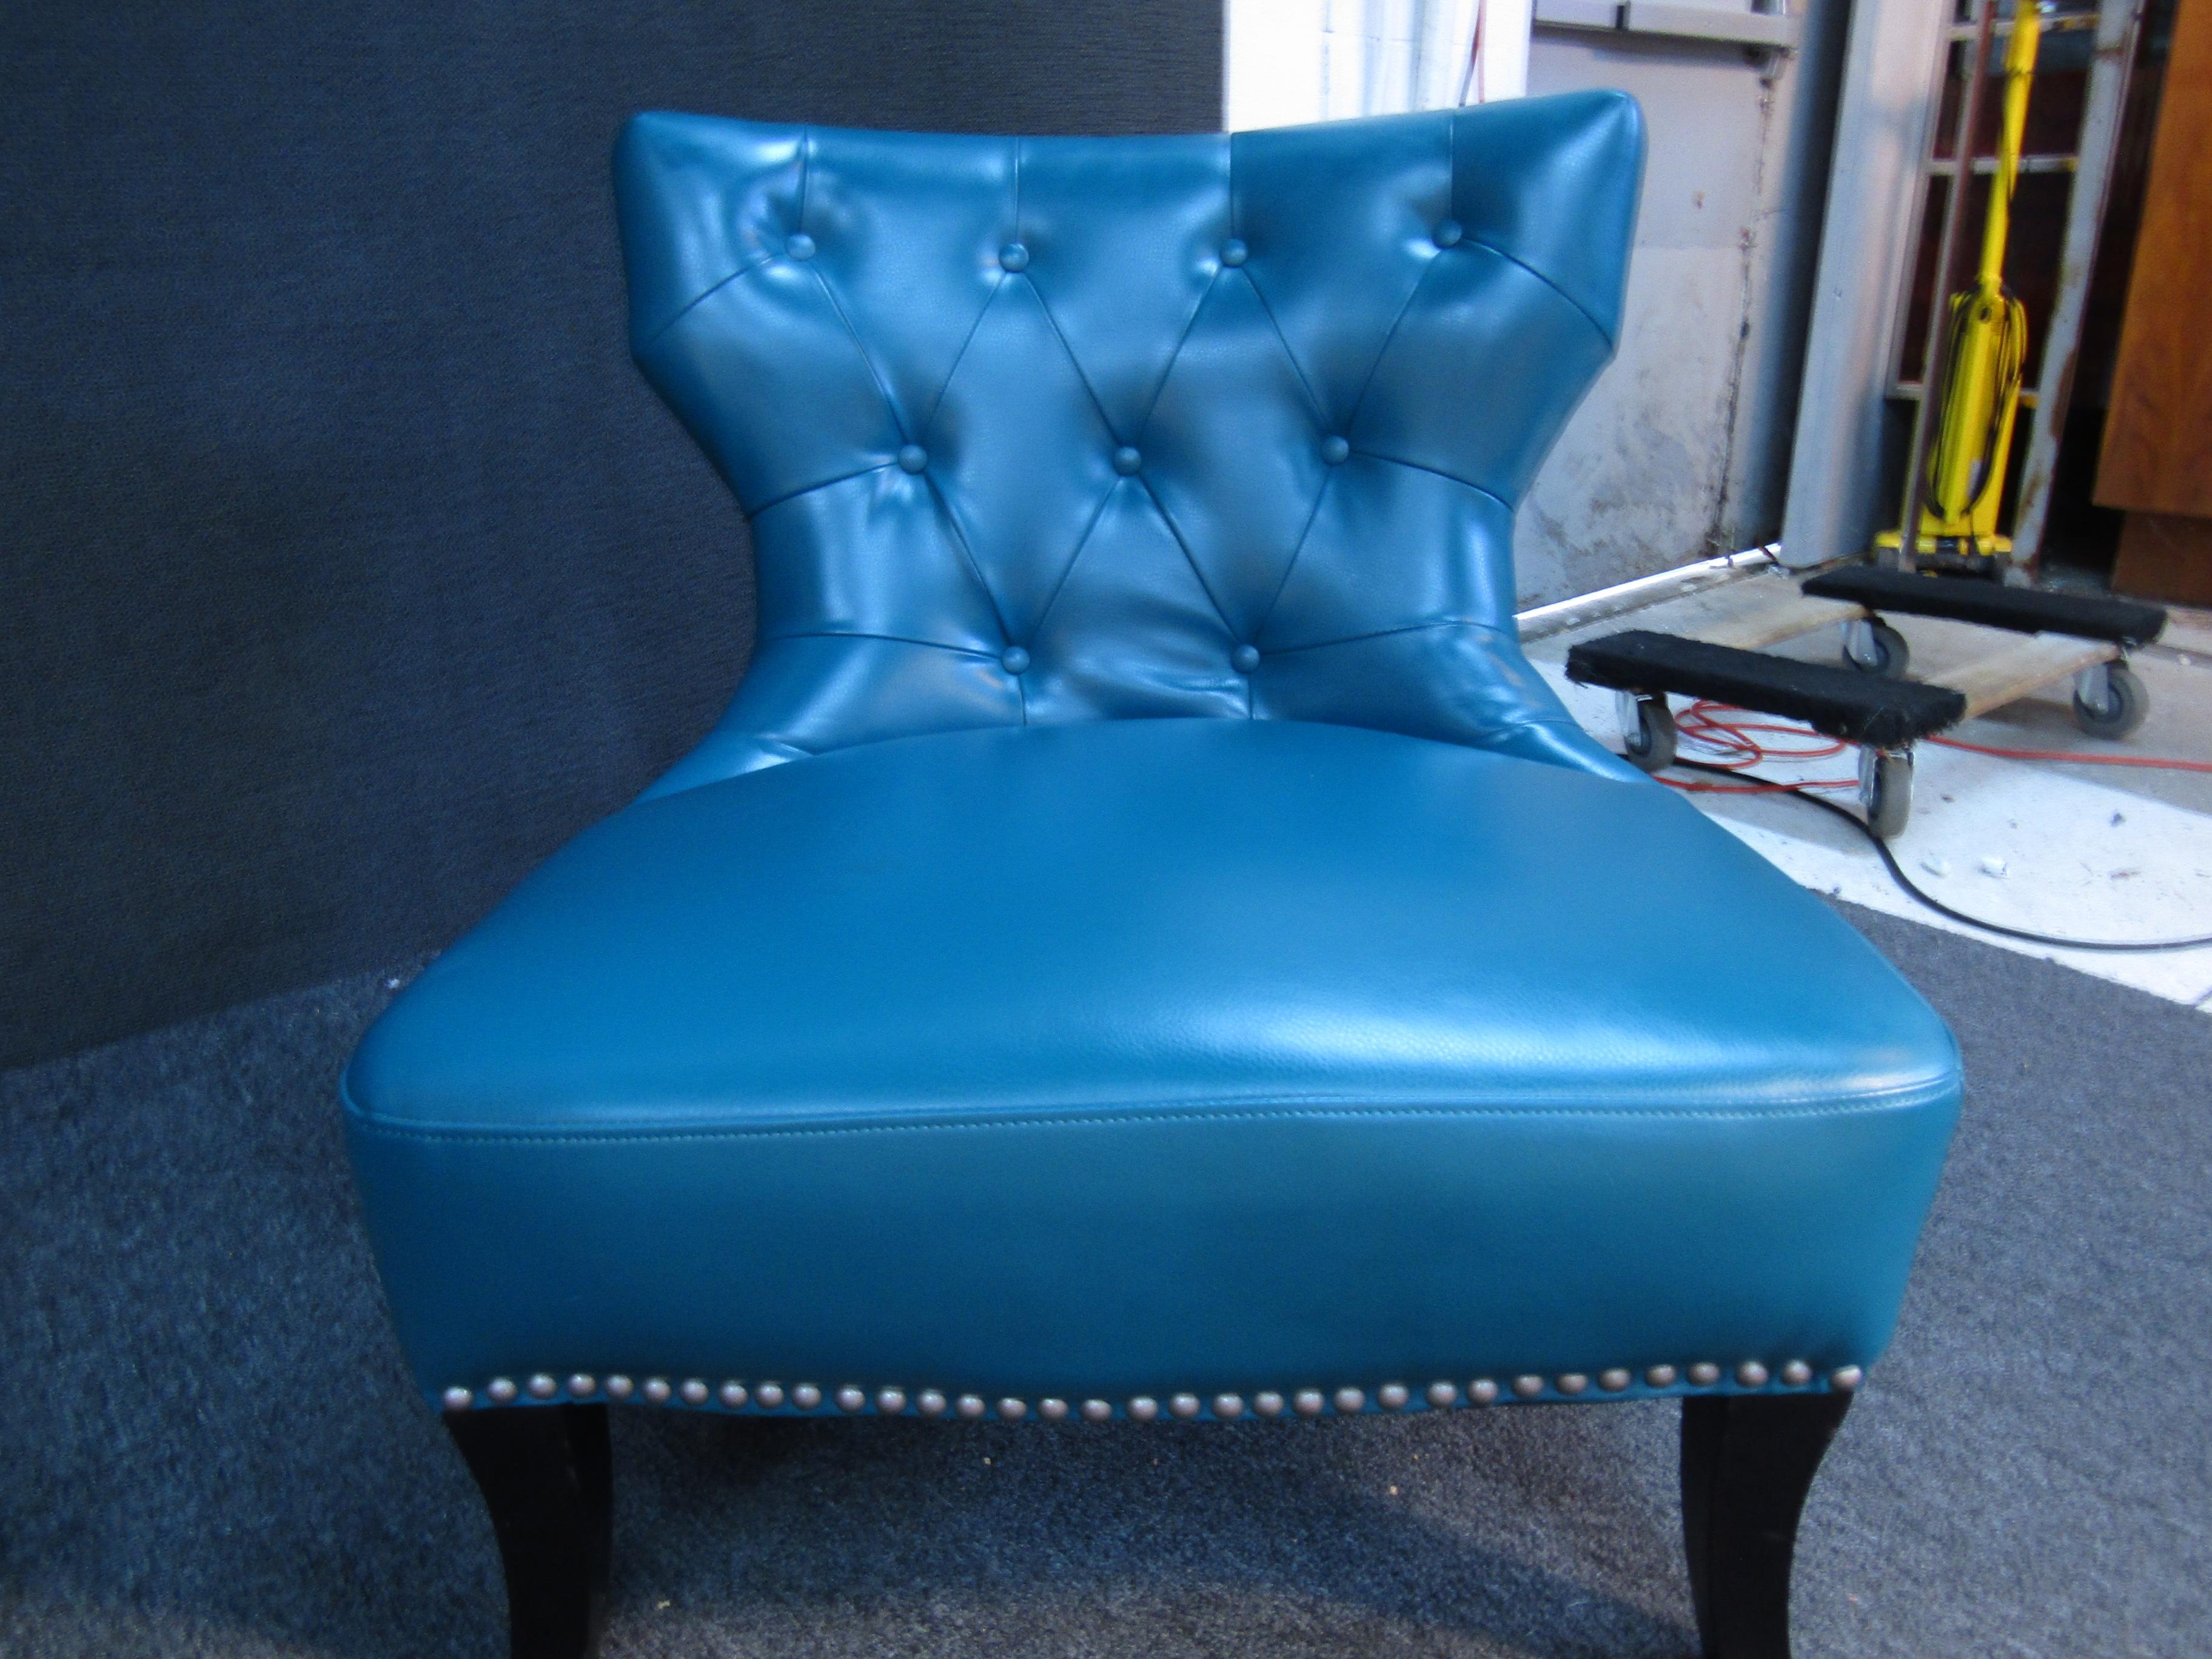 Upholstered in a brilliant blue material, this pair of vintage lounge chairs is a sure way to add comfort and a pop of color to any space. Please confirm item location with seller (NY/NJ).